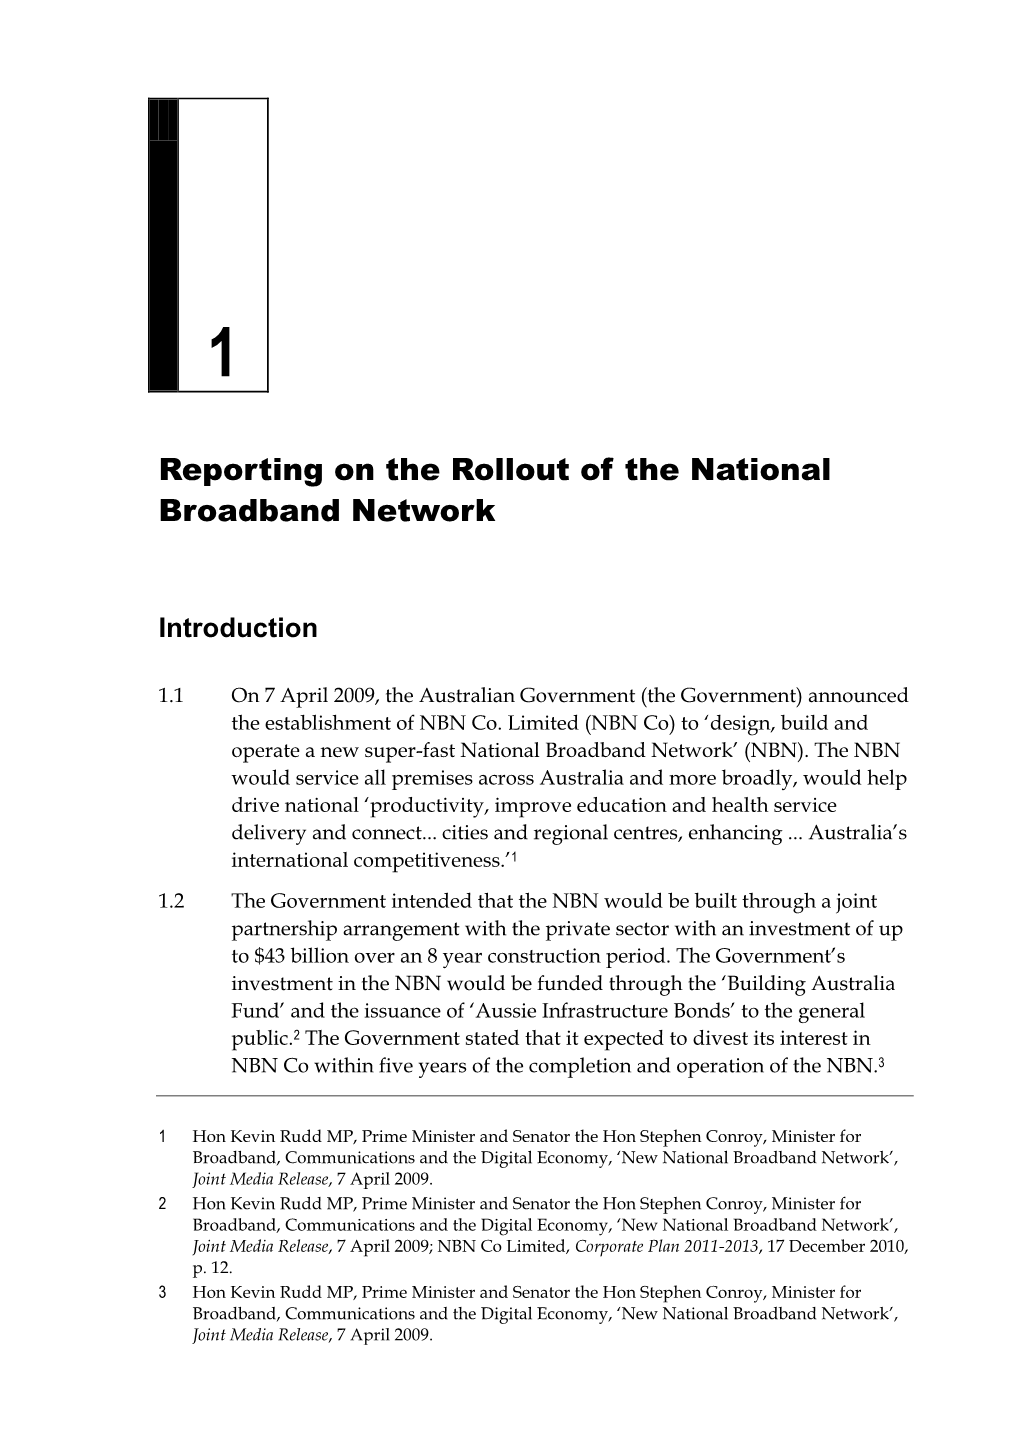 Chapter 1 Outlines the Main Areas of Review of the Progress of the Rollout of the NBN Including: Reporting Intervals and Key Performance Measures and Indicators